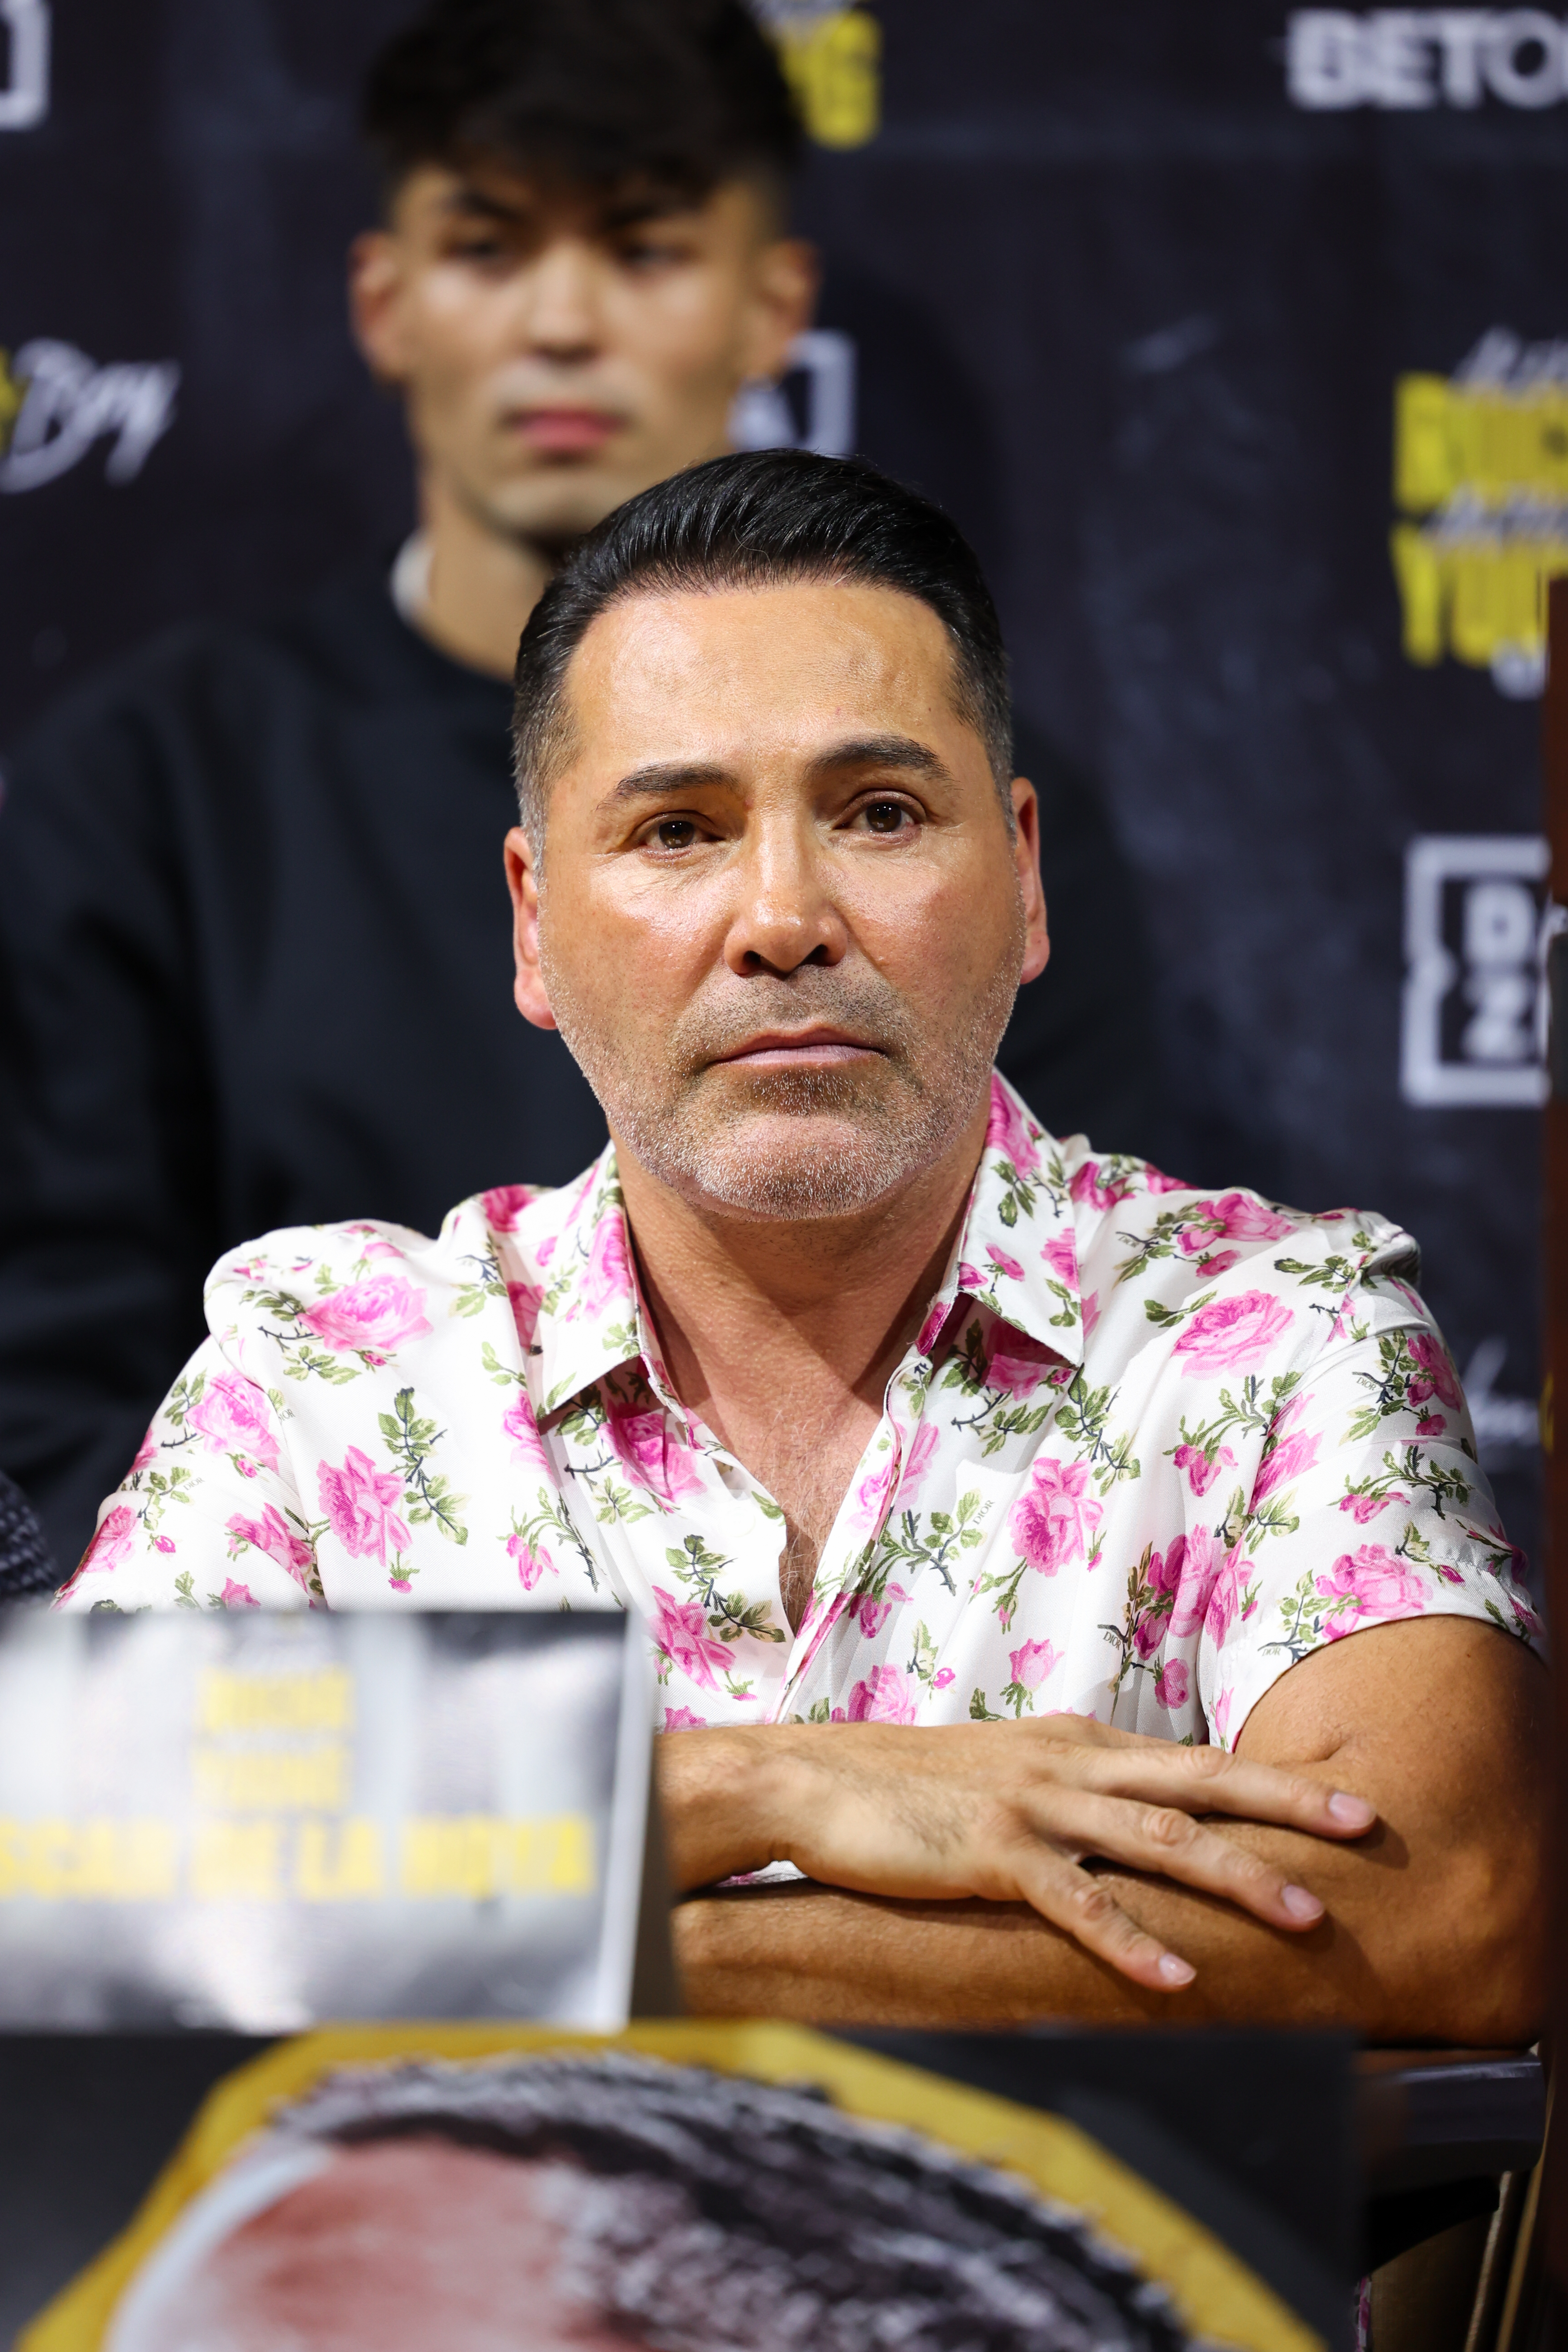 Oscar De La Hoya: Floyd Mayweather is an all-time great, recent bouts don't hurt his legacy